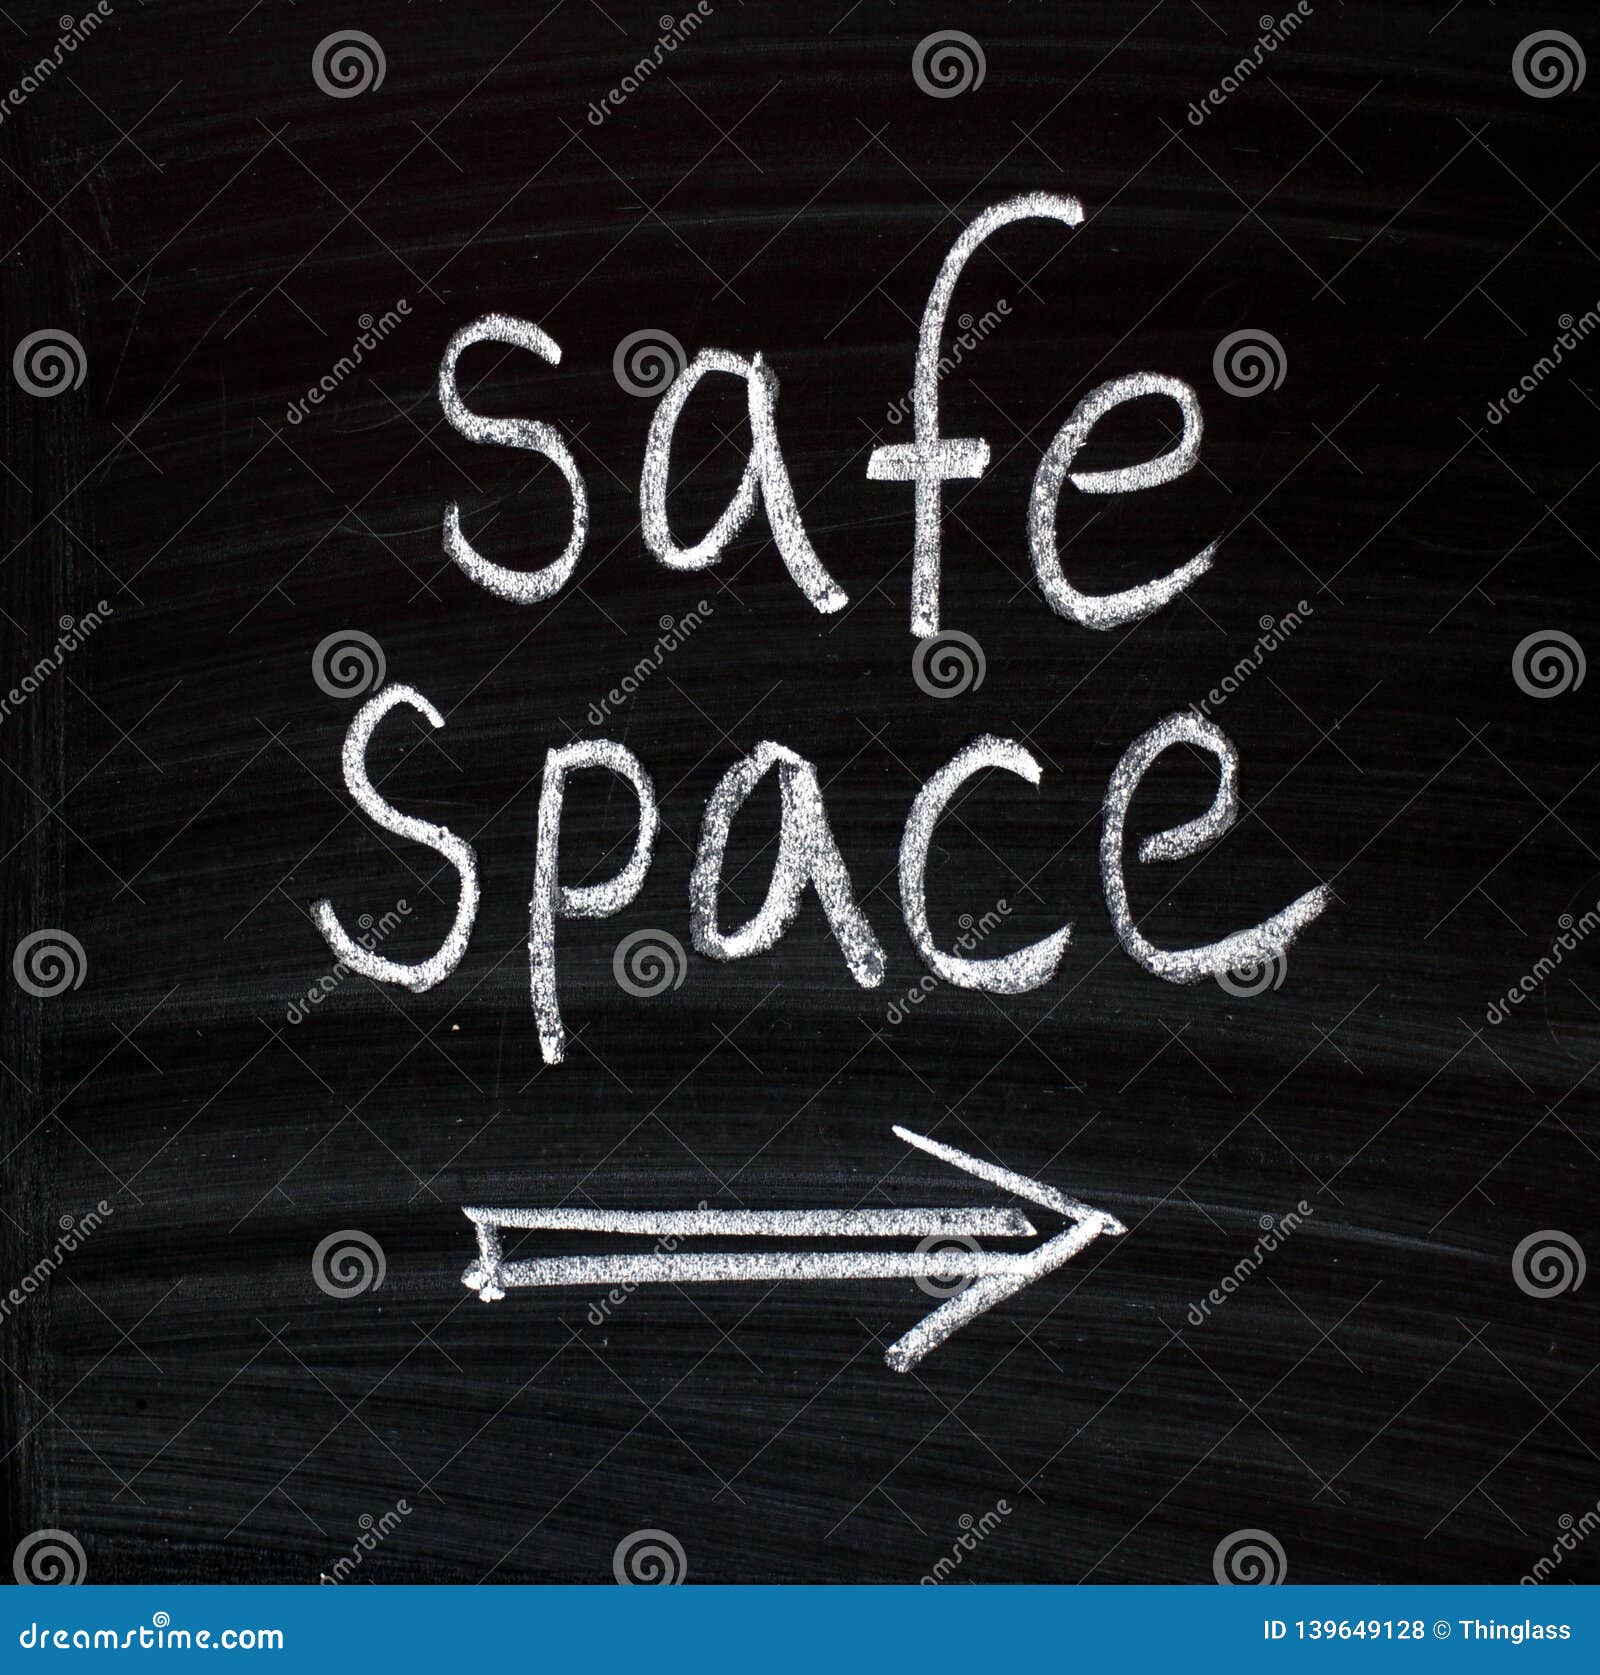 the phrase safe space on a blackboard